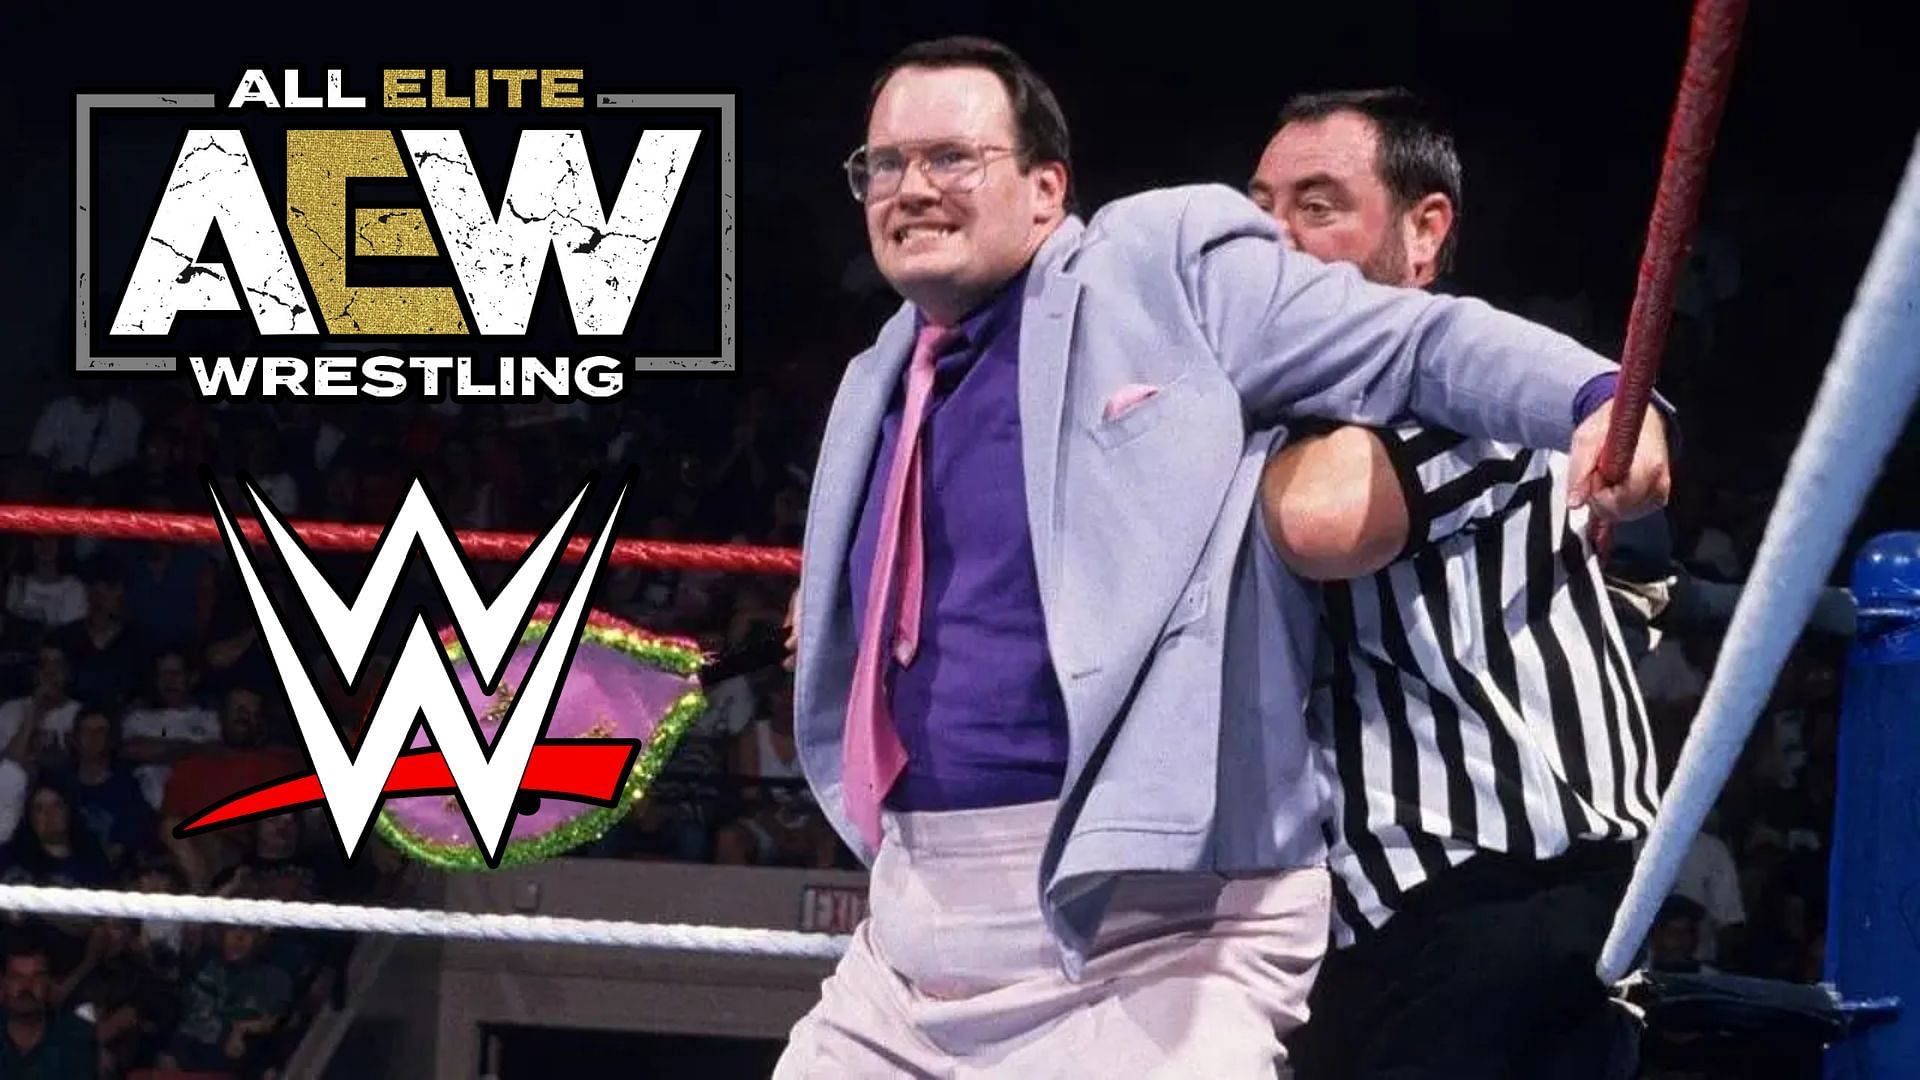 Jim Cornette was puzzled by AEW booking this former WWE Superstar.